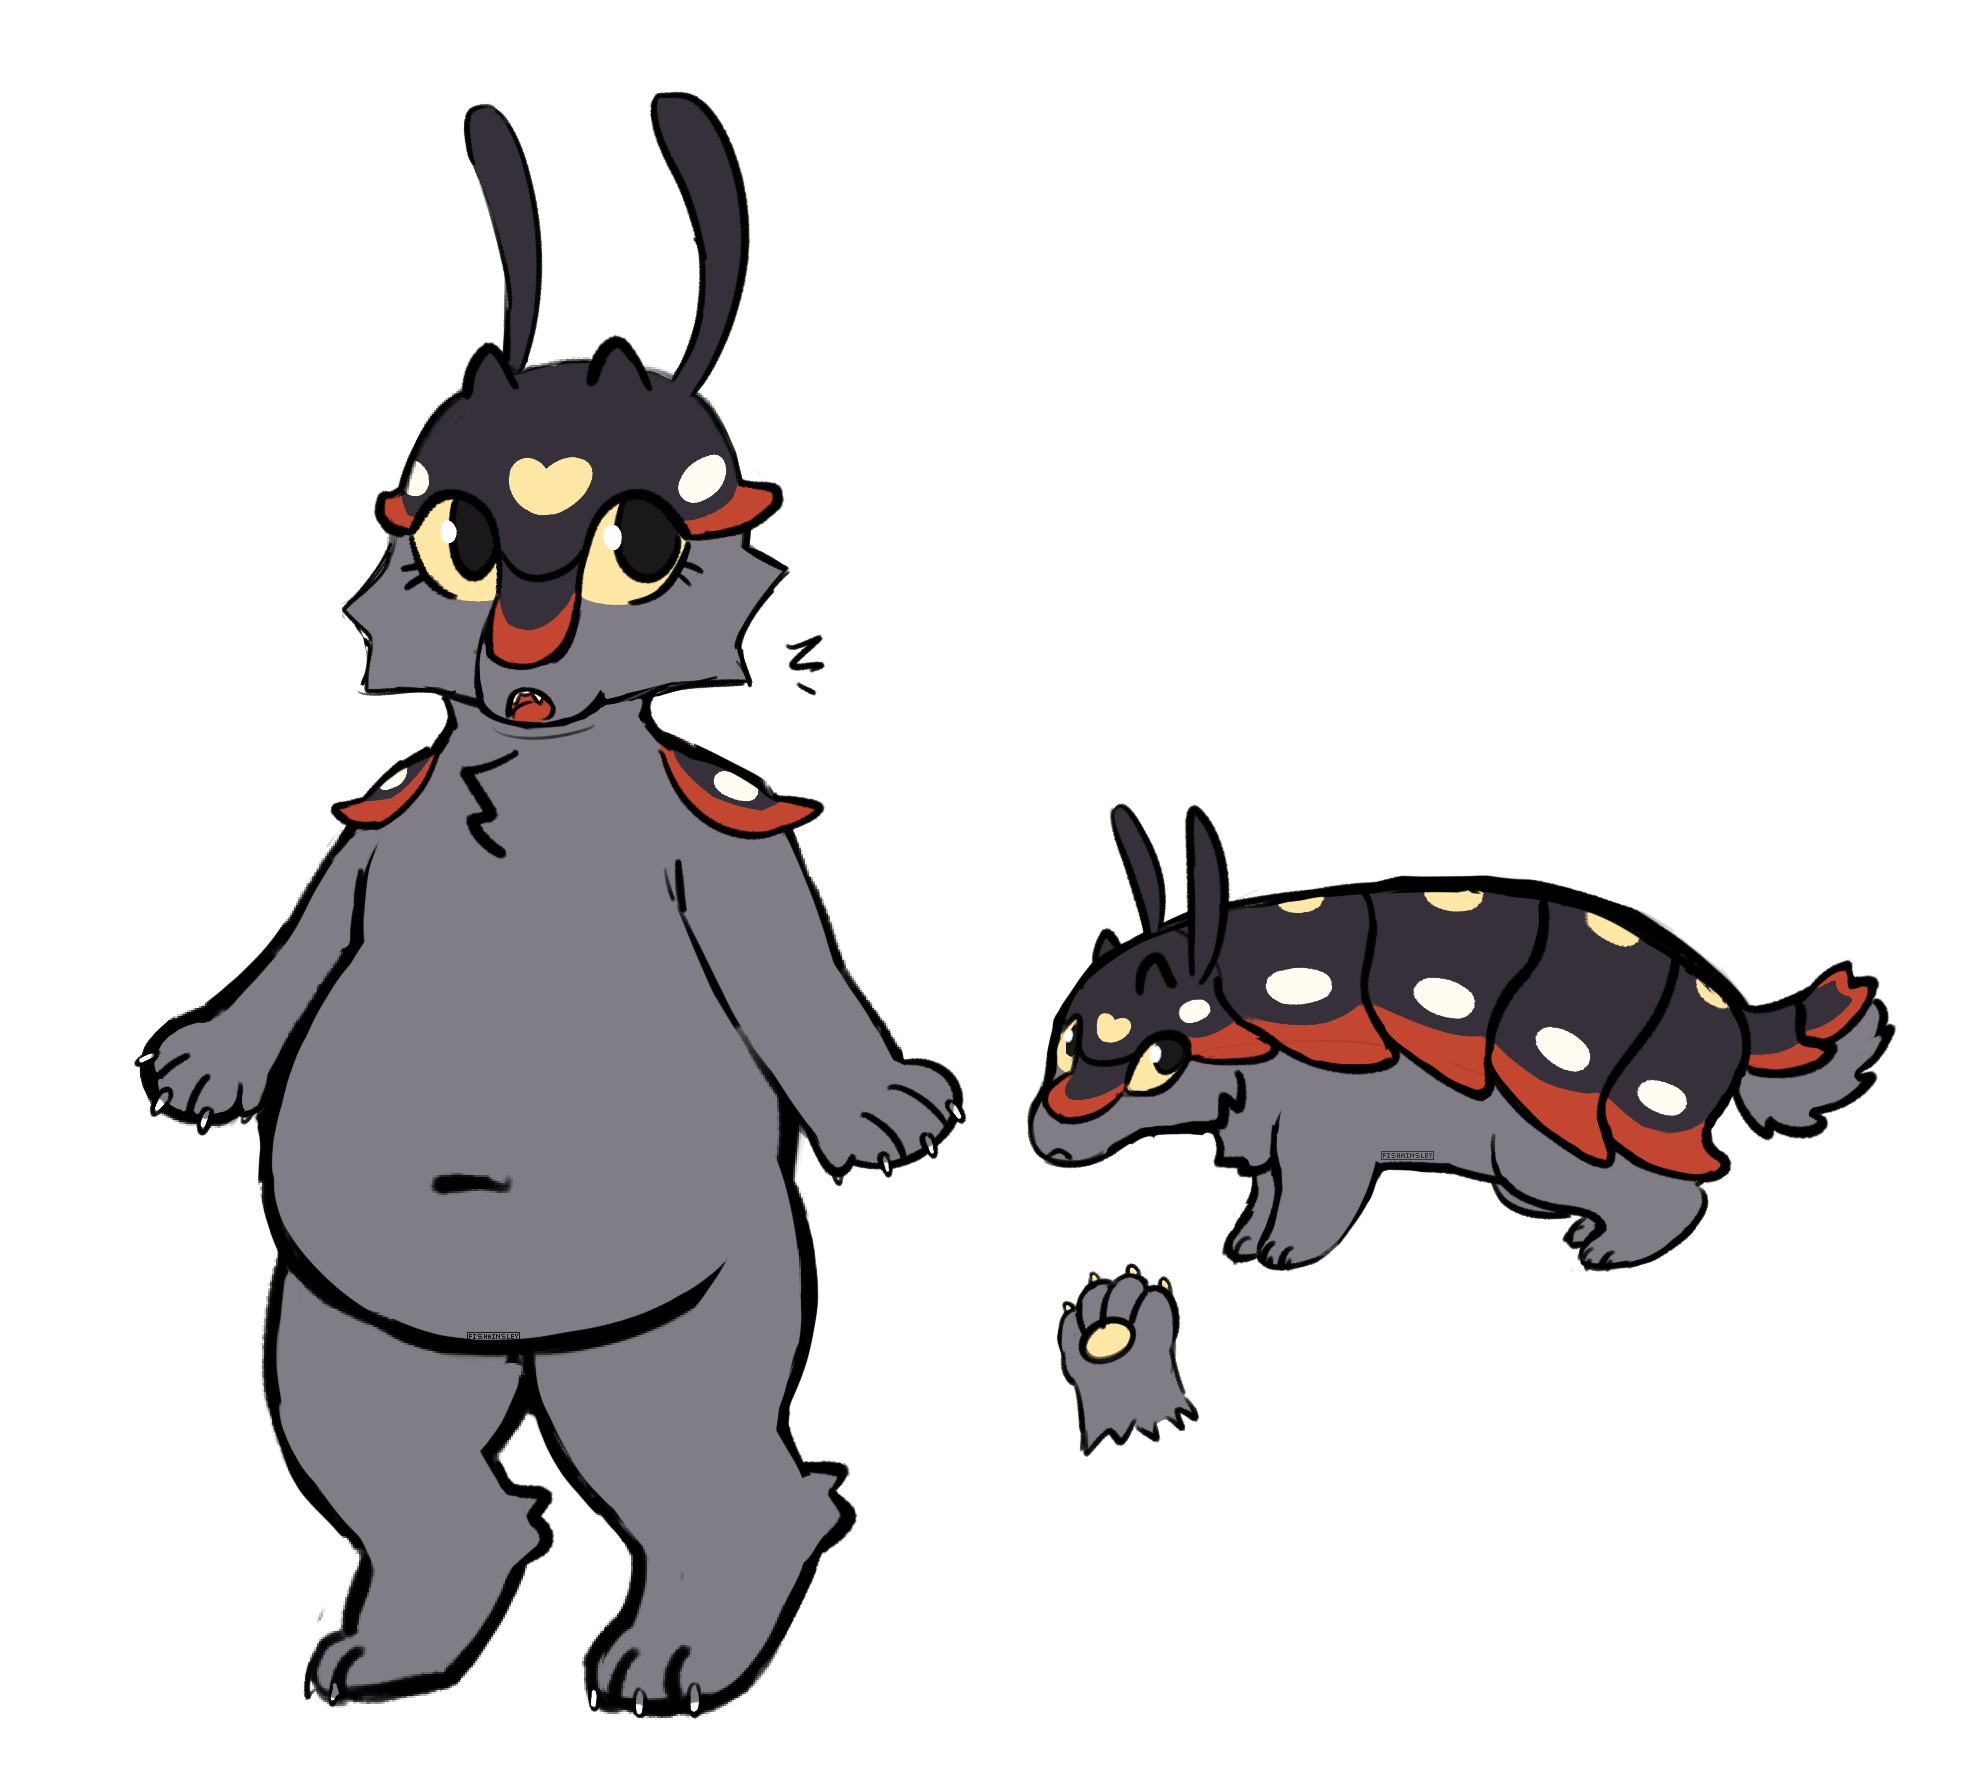 Image of two forms of a dark grey isopod character with red and yellow markings, one anthro and one feral.